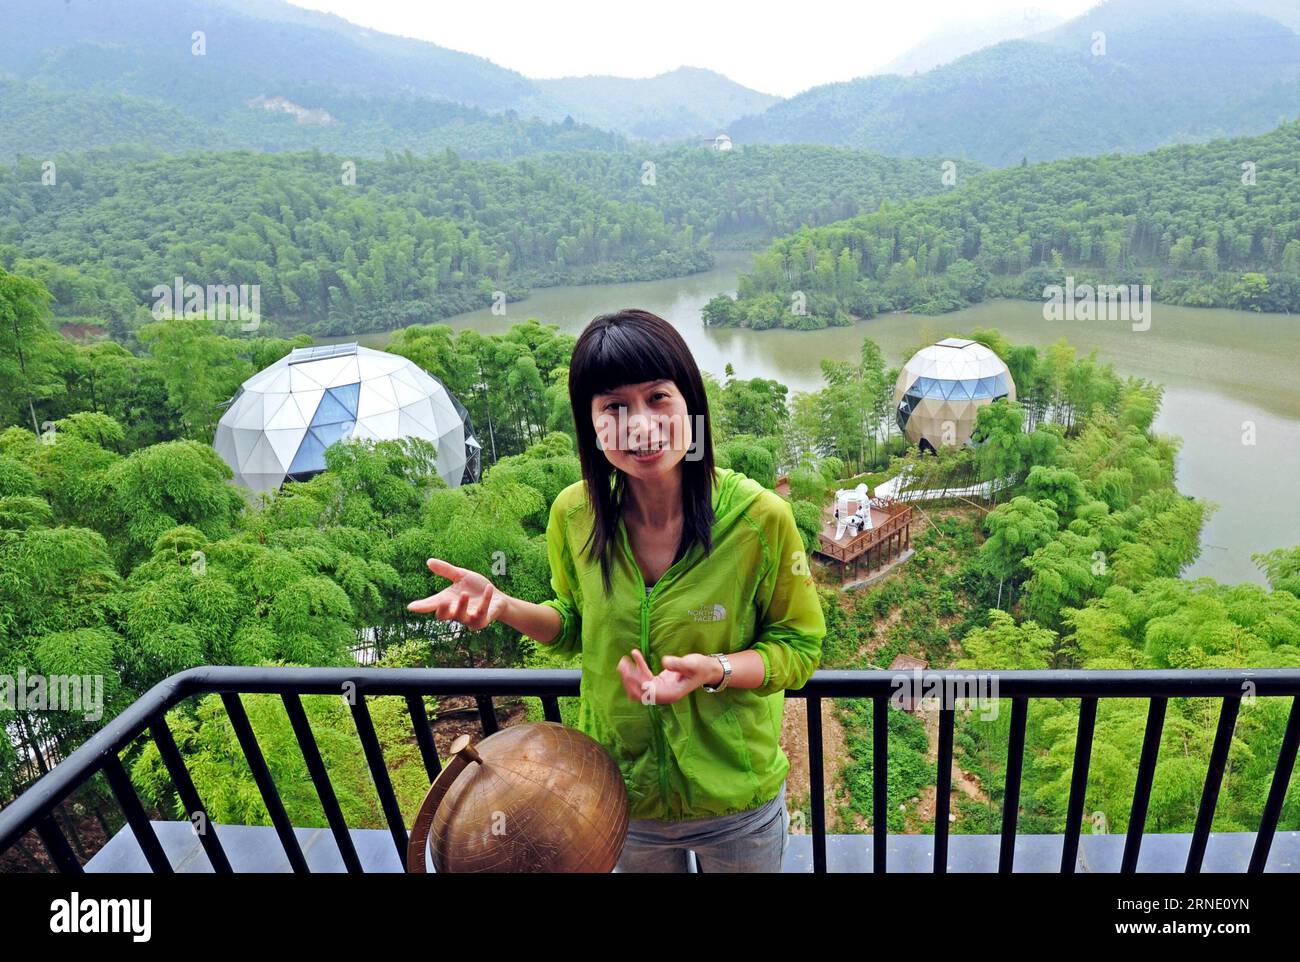 (160605) -- ANJI, June 5, 2016 -- CEO Bao Huiqin introduces her environment-friendly resort in Anji County, east China s Zhejiang Province, June 2, 2016. Anji is known for its pleasant environment with flourishing bamboo plantations and many scenes from the famous movie Crouching Tiger, Hidden Dragon were shot here. The county persists in green, low-carbon development, and strives to protect environment as well as to develop local economy. June 5 is observed as World Environment Day every year, and this year s theme issued by China s Ministry of Environment Protection is improving the quality Stock Photo